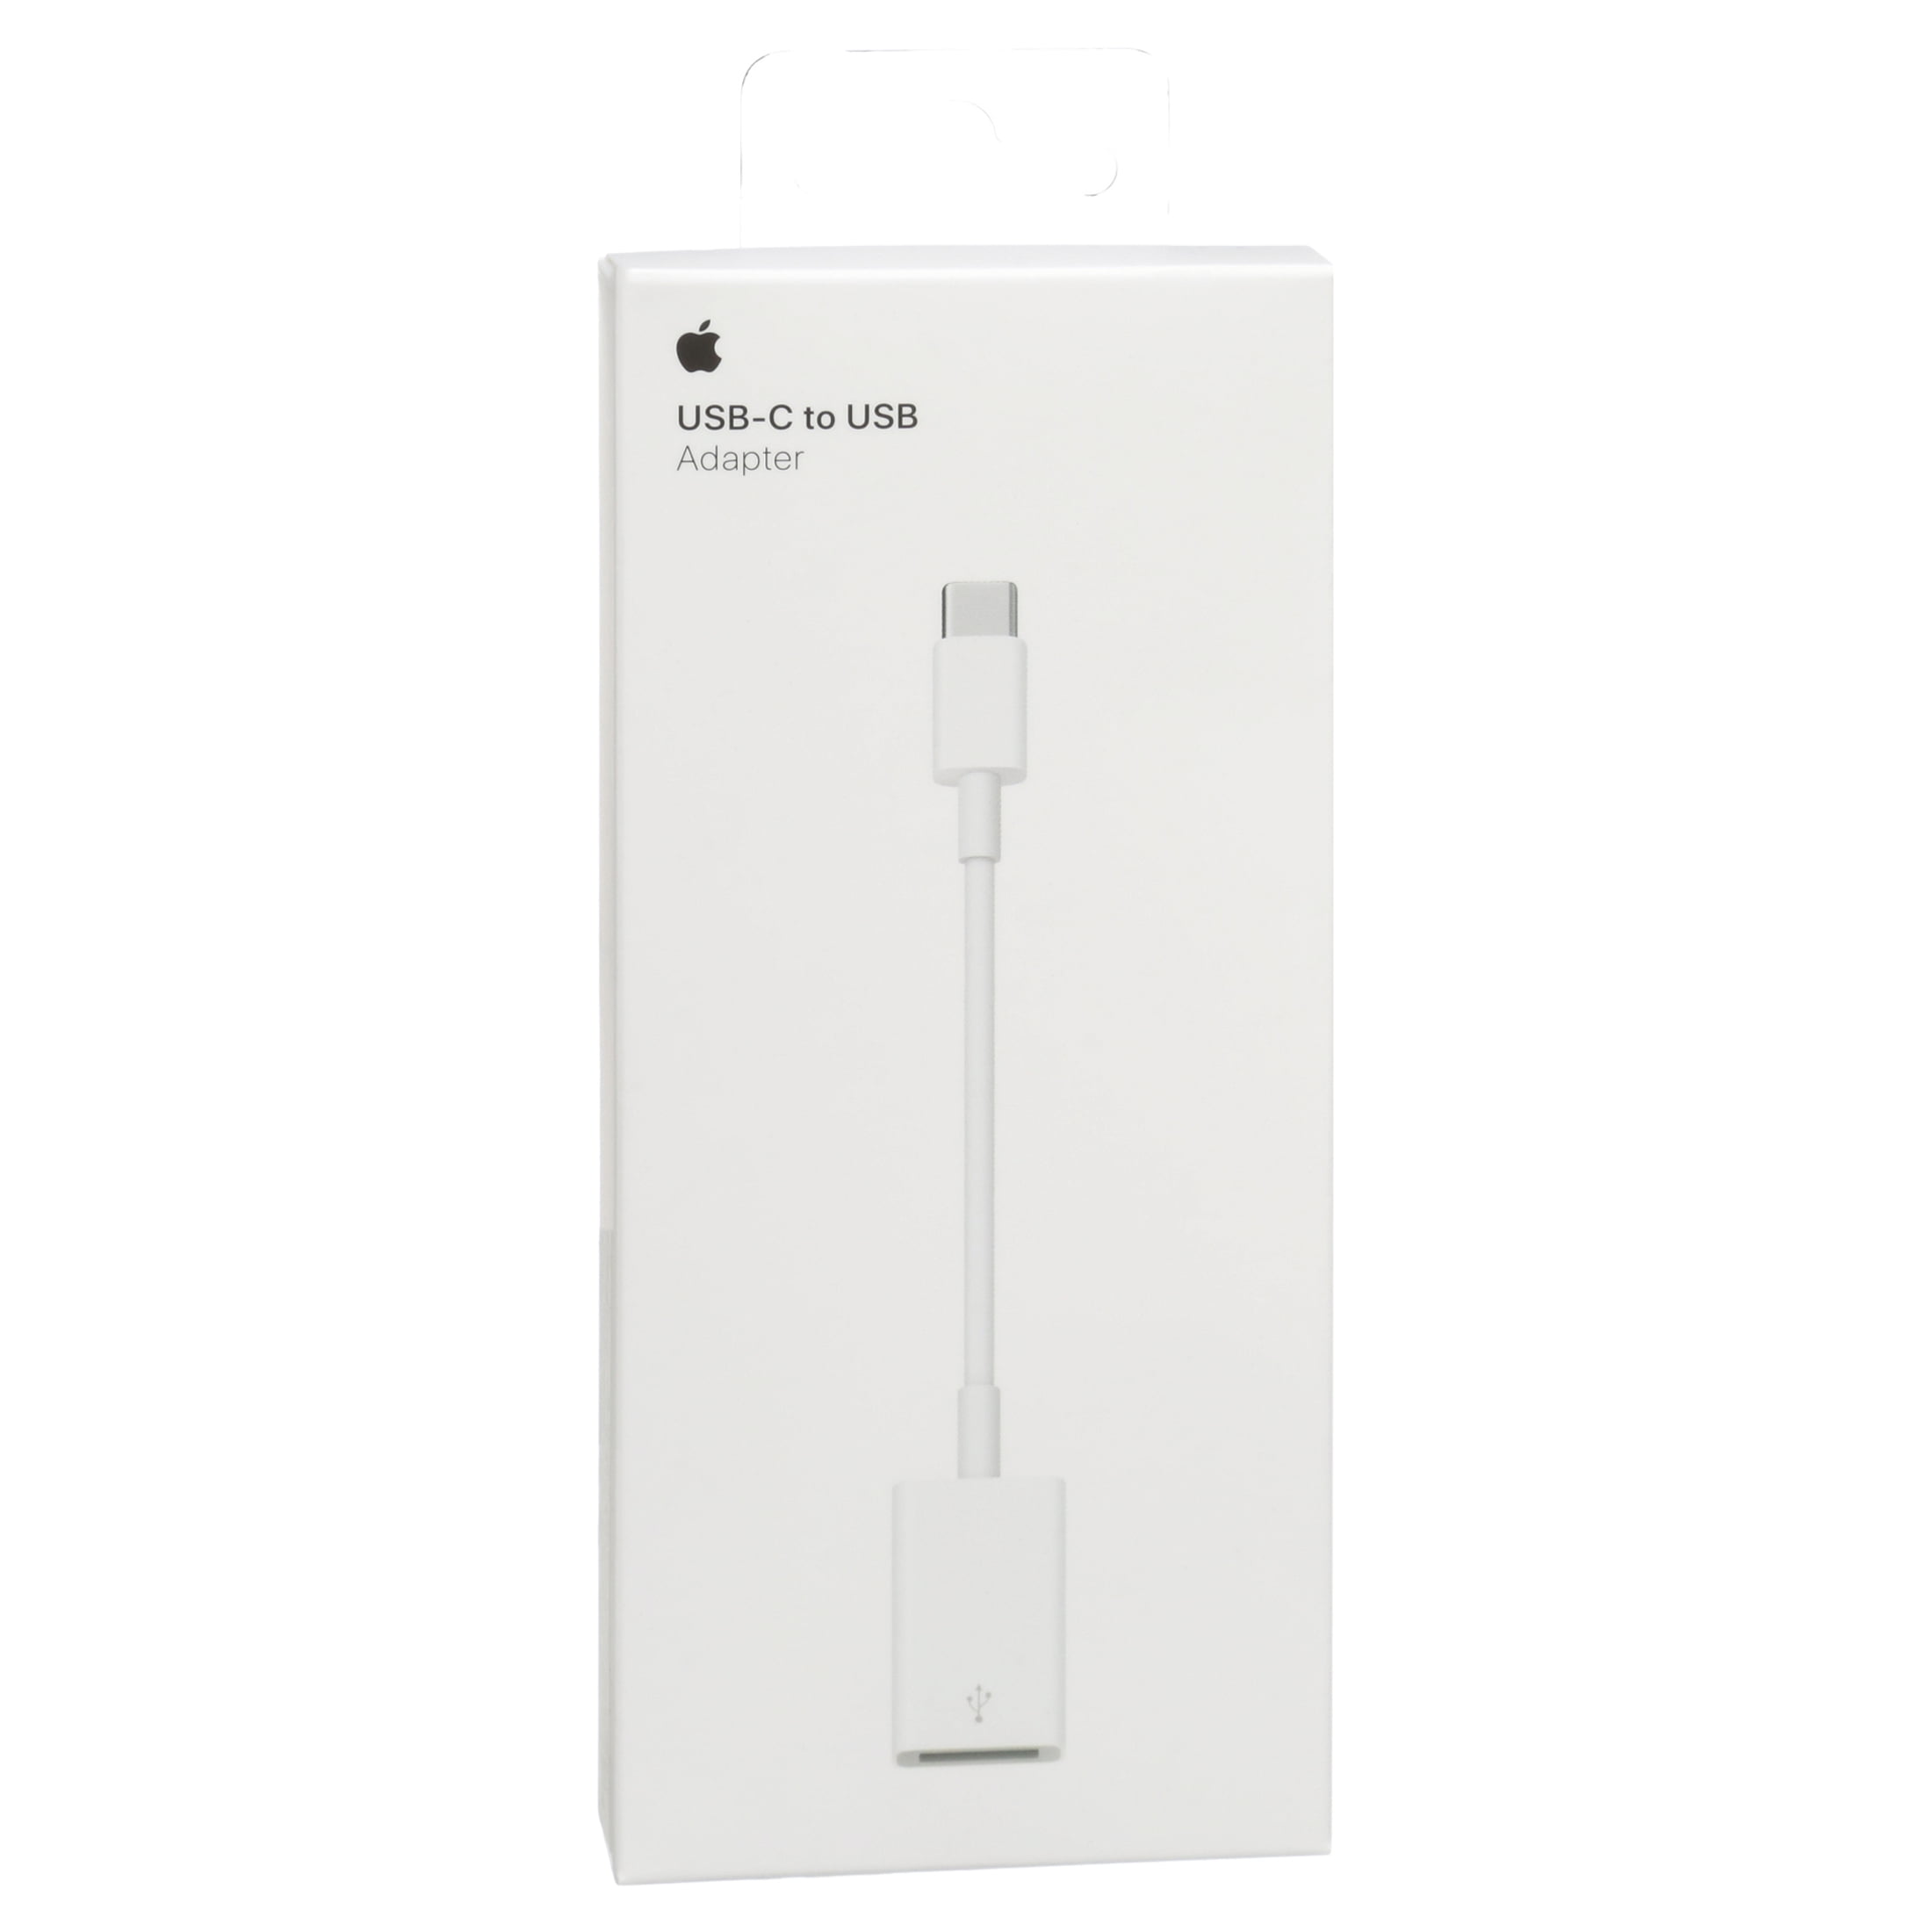 Unboxing: Apple USB-C to USB Adapter 